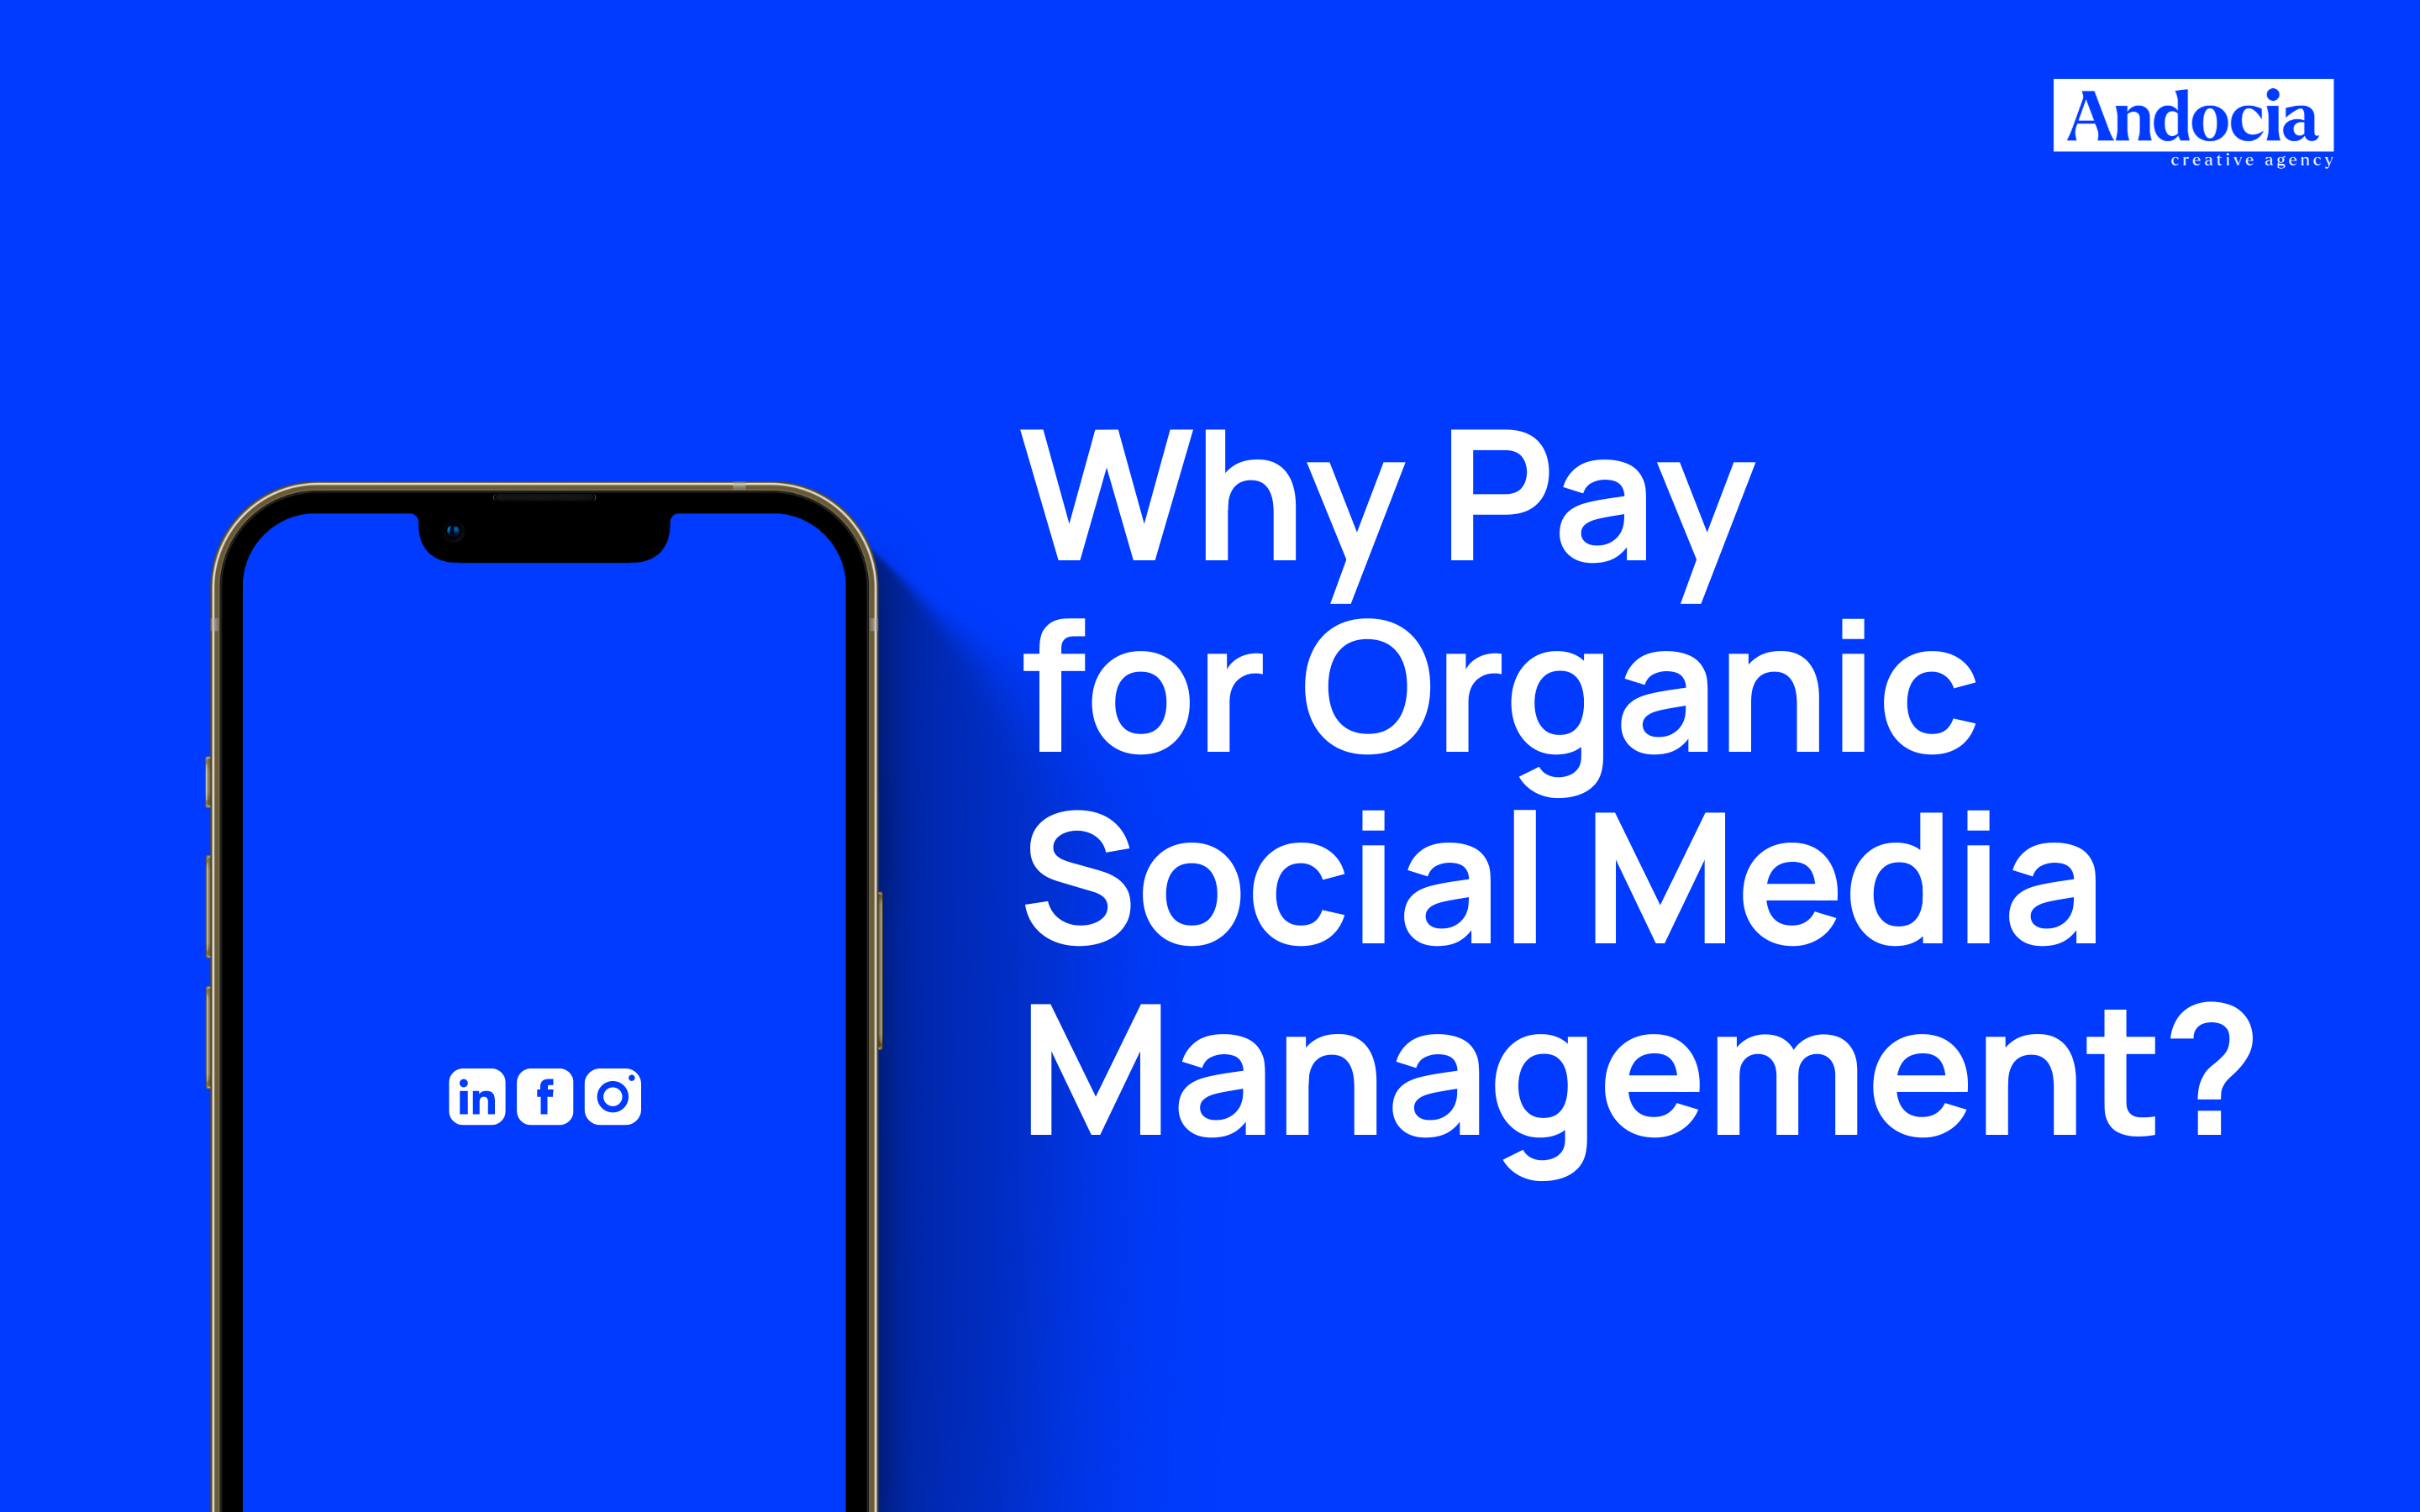 6 Reasons Why You Should Pay for Organic Social Media Management